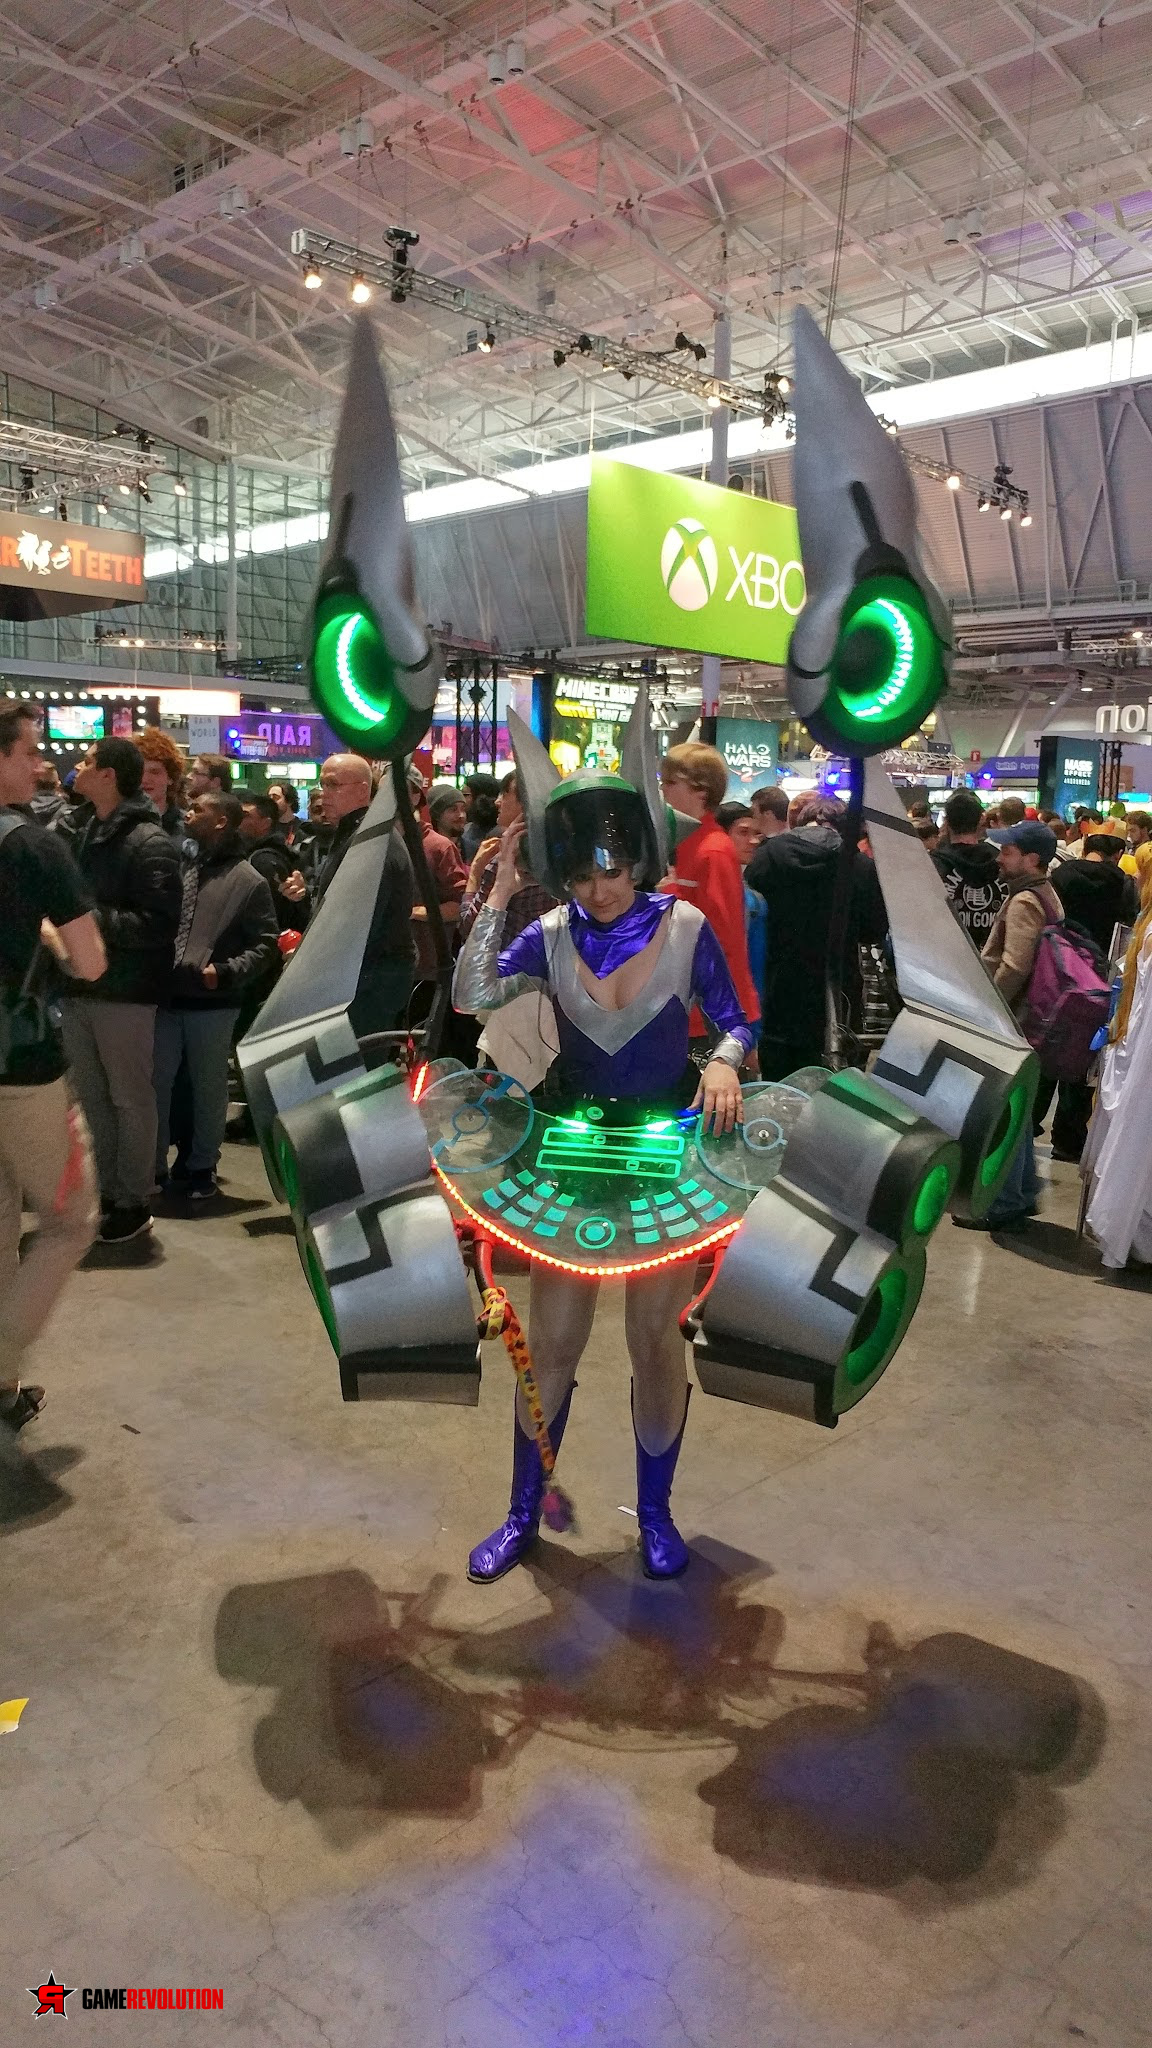 PAX East 2017 Gallery: Booths, Games, And Cosplay From The Show Floor #4